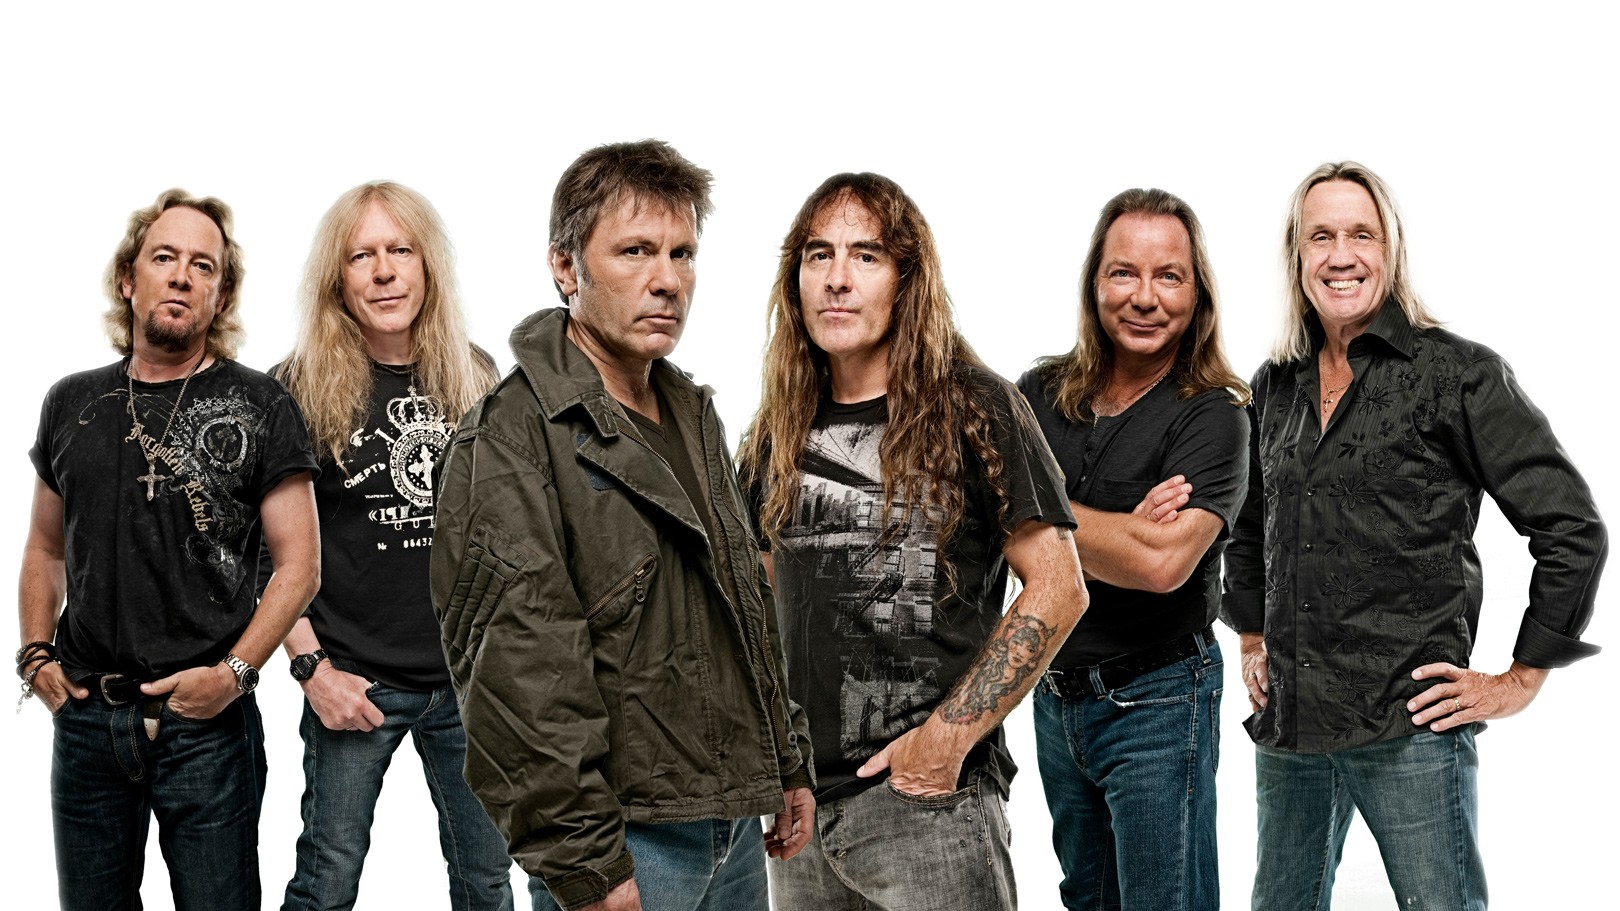 Legendary metal band Iron Maiden returns to Spokane for the first time  since 1988, Music News, Spokane, The Pacific Northwest Inlander